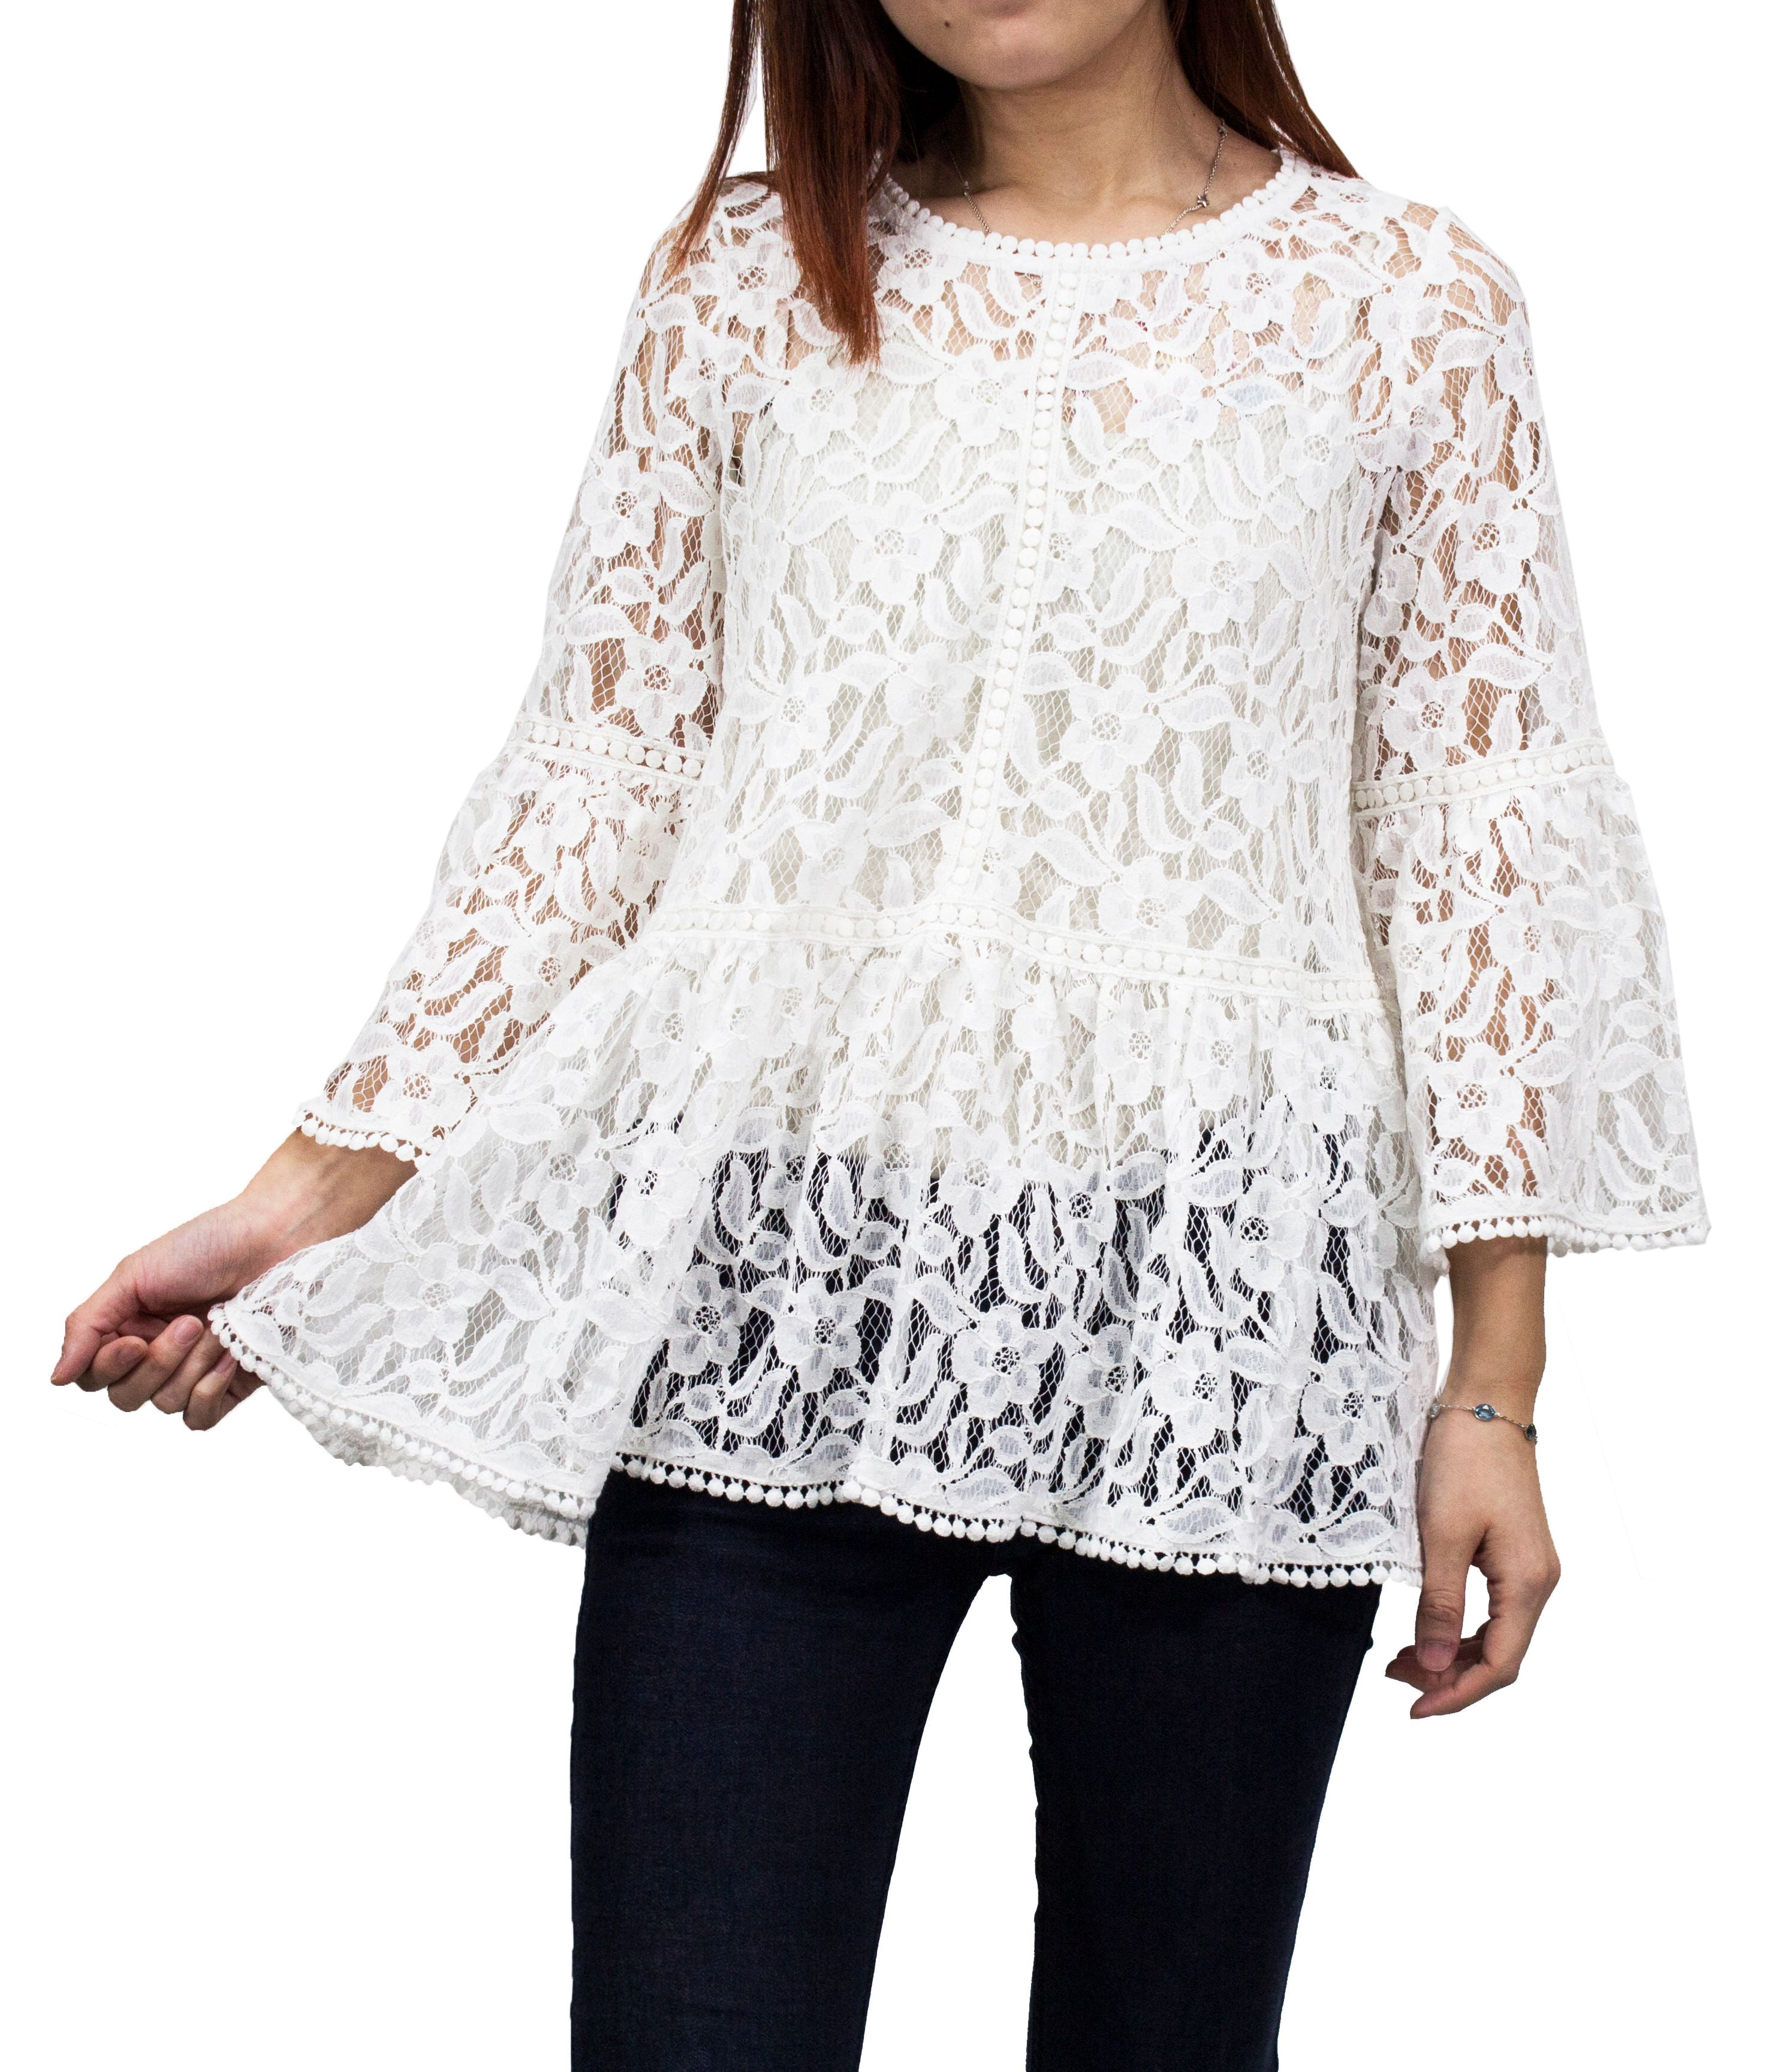 SAY Styles All Yours Womens Openwork Crochet Floral Lace Bell Sleeve ...